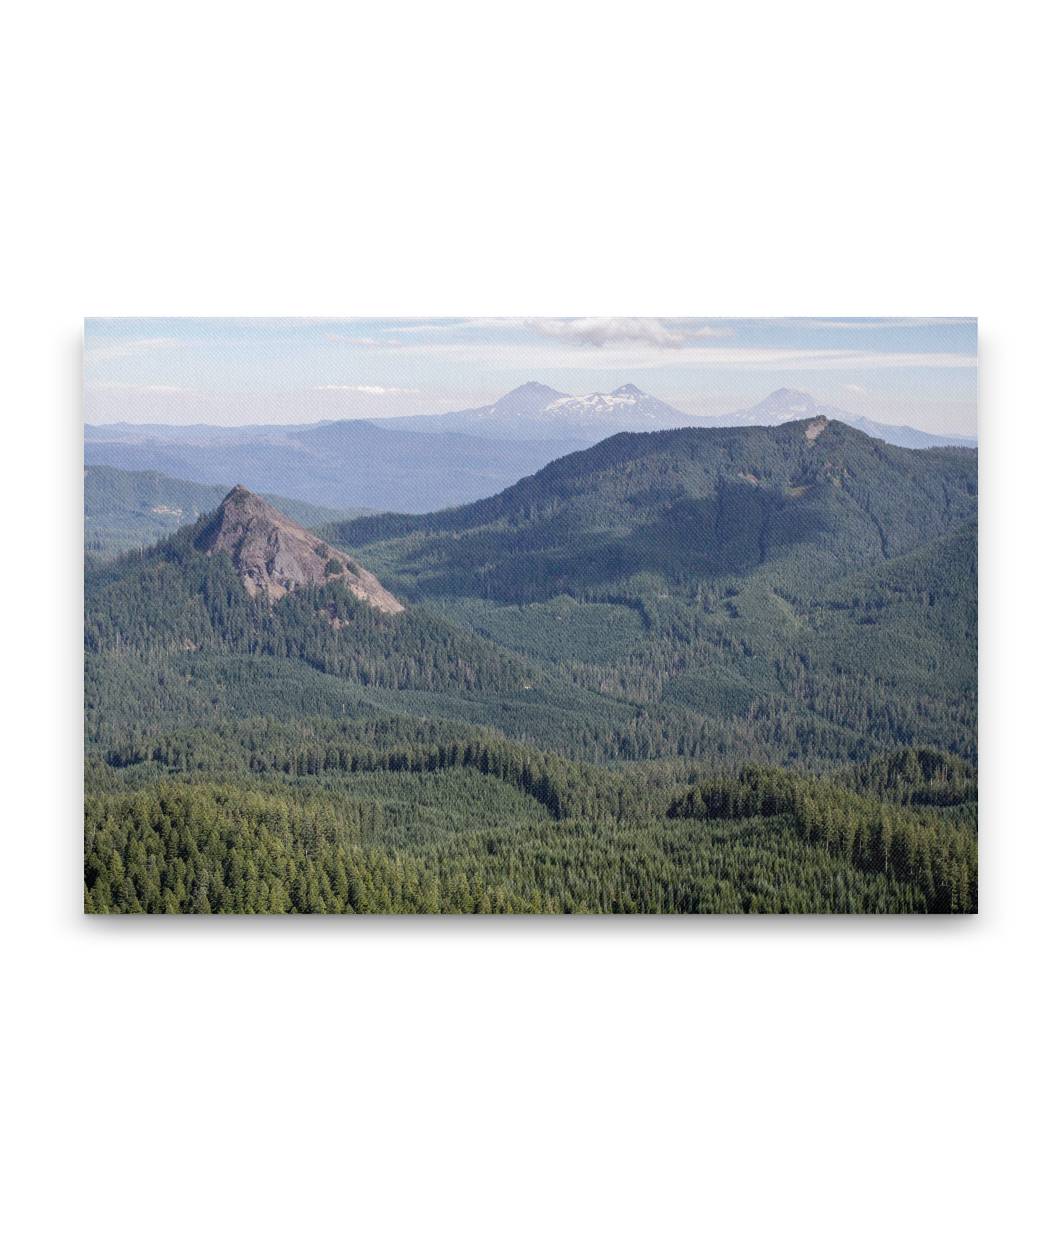 Wolf Rock Aerial View, Carpenter Mountain, Three Sisters Wilderness, Oregon